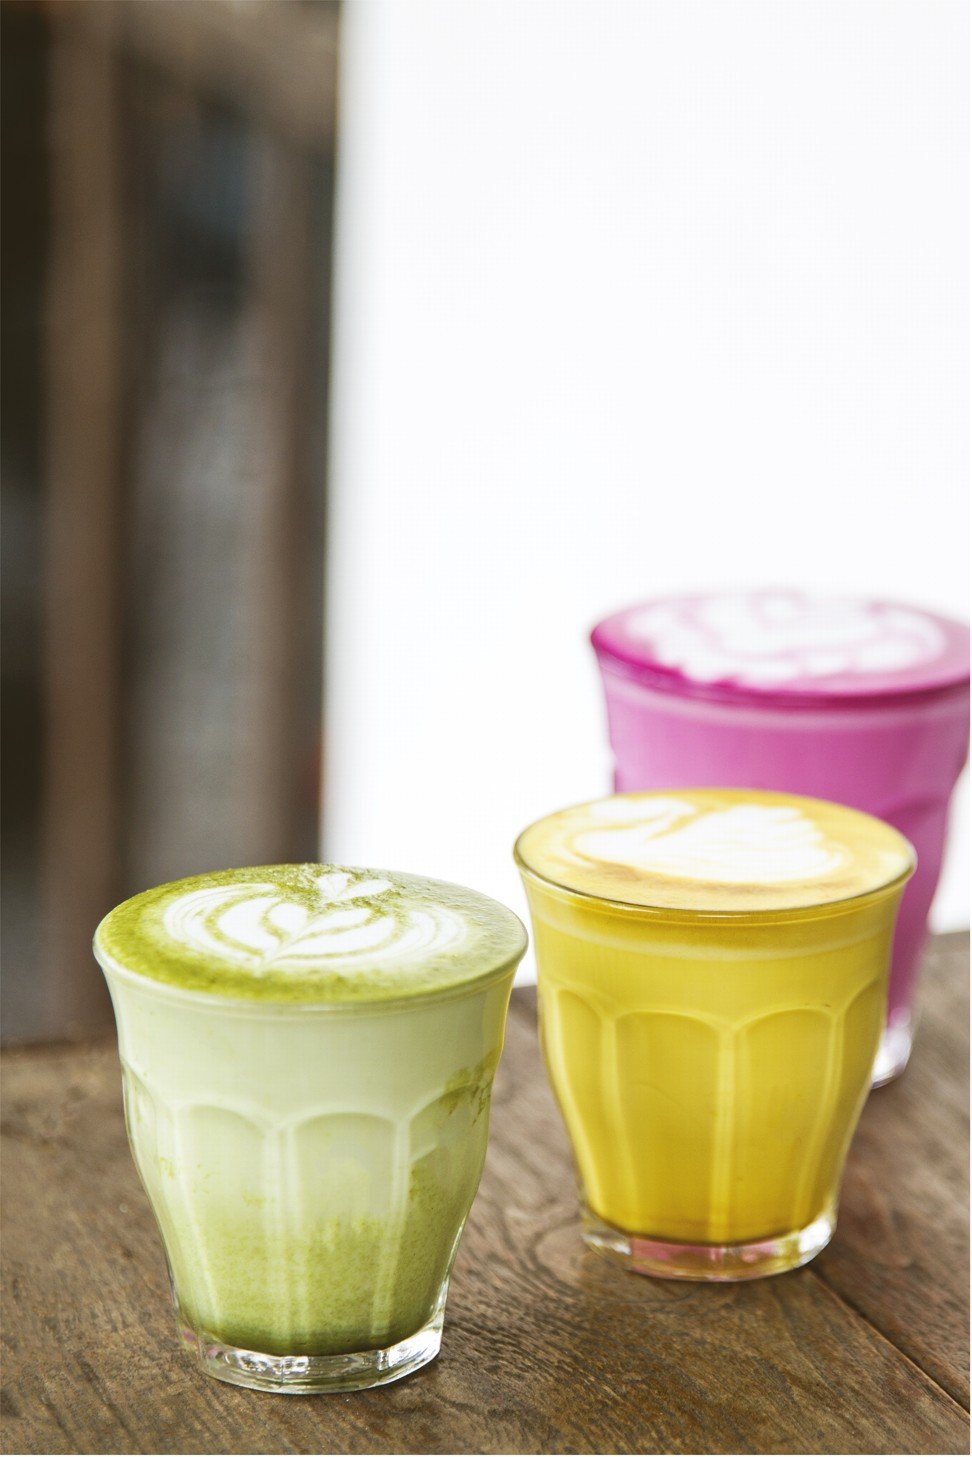 Beetroot, matcha and turmeric lattes are trendy healthy drinks.